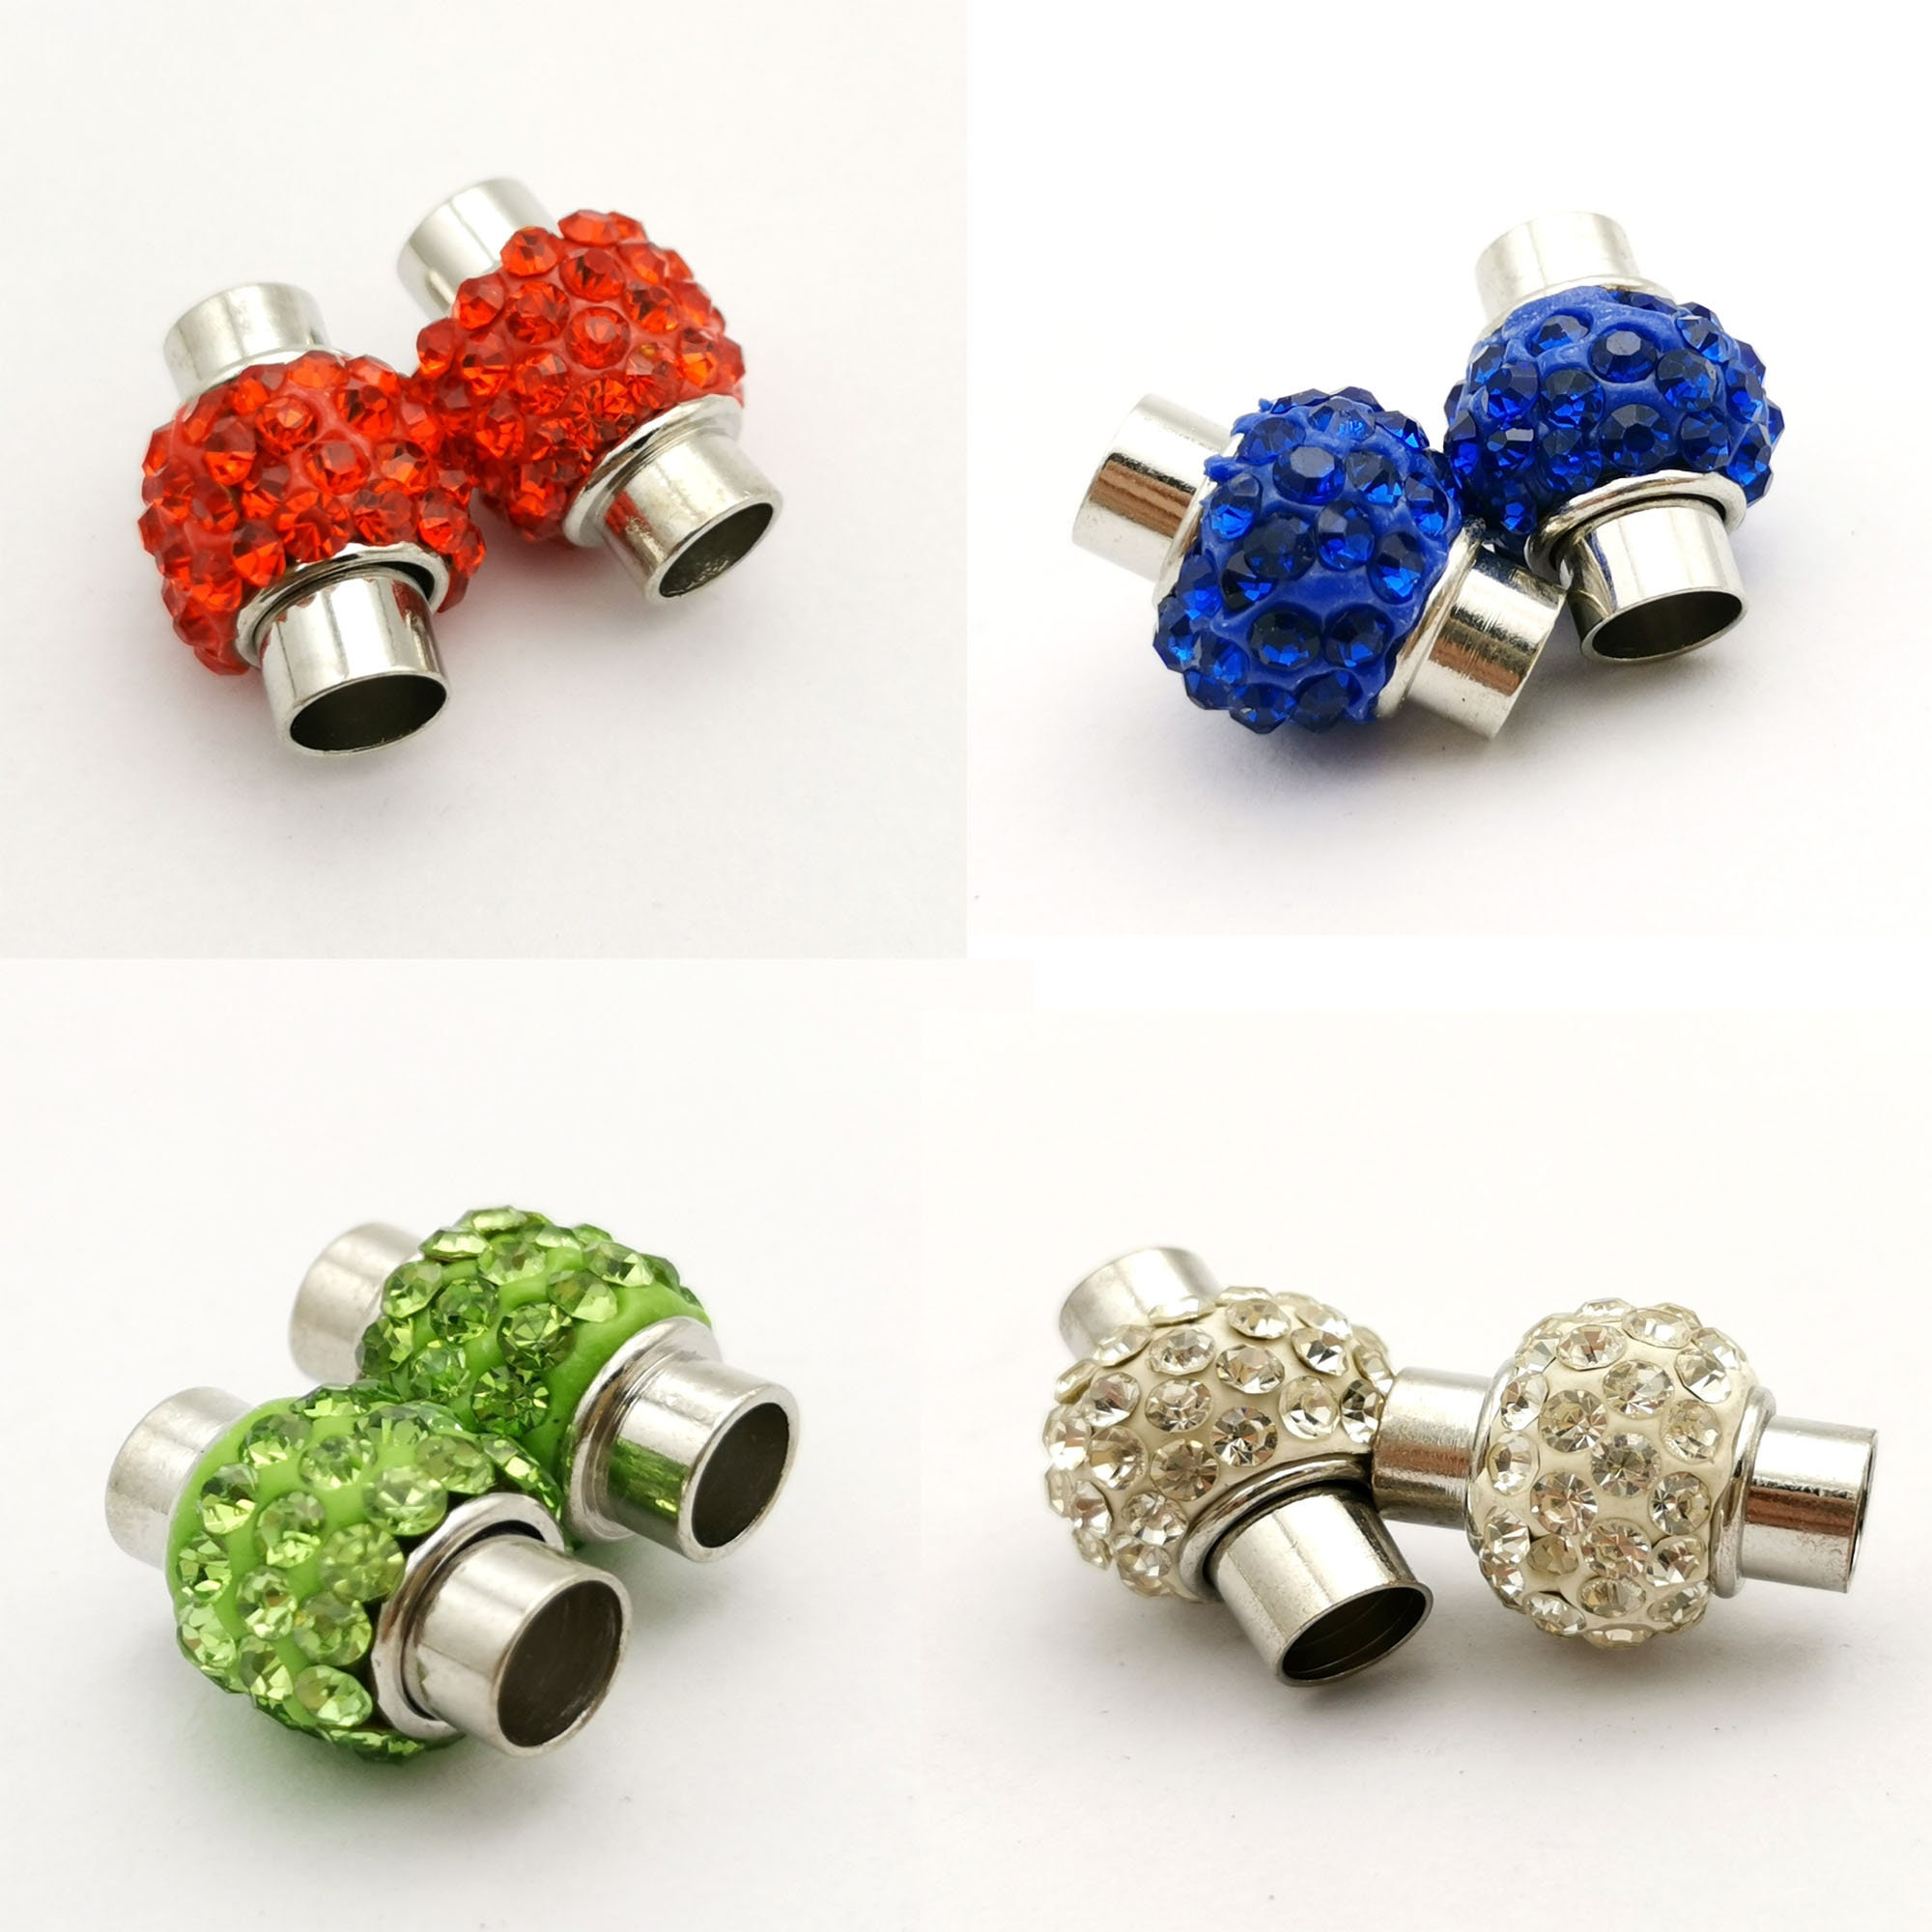 12PC Magnetic Necklace Clasps and Closures. Strong Magnet Clasp